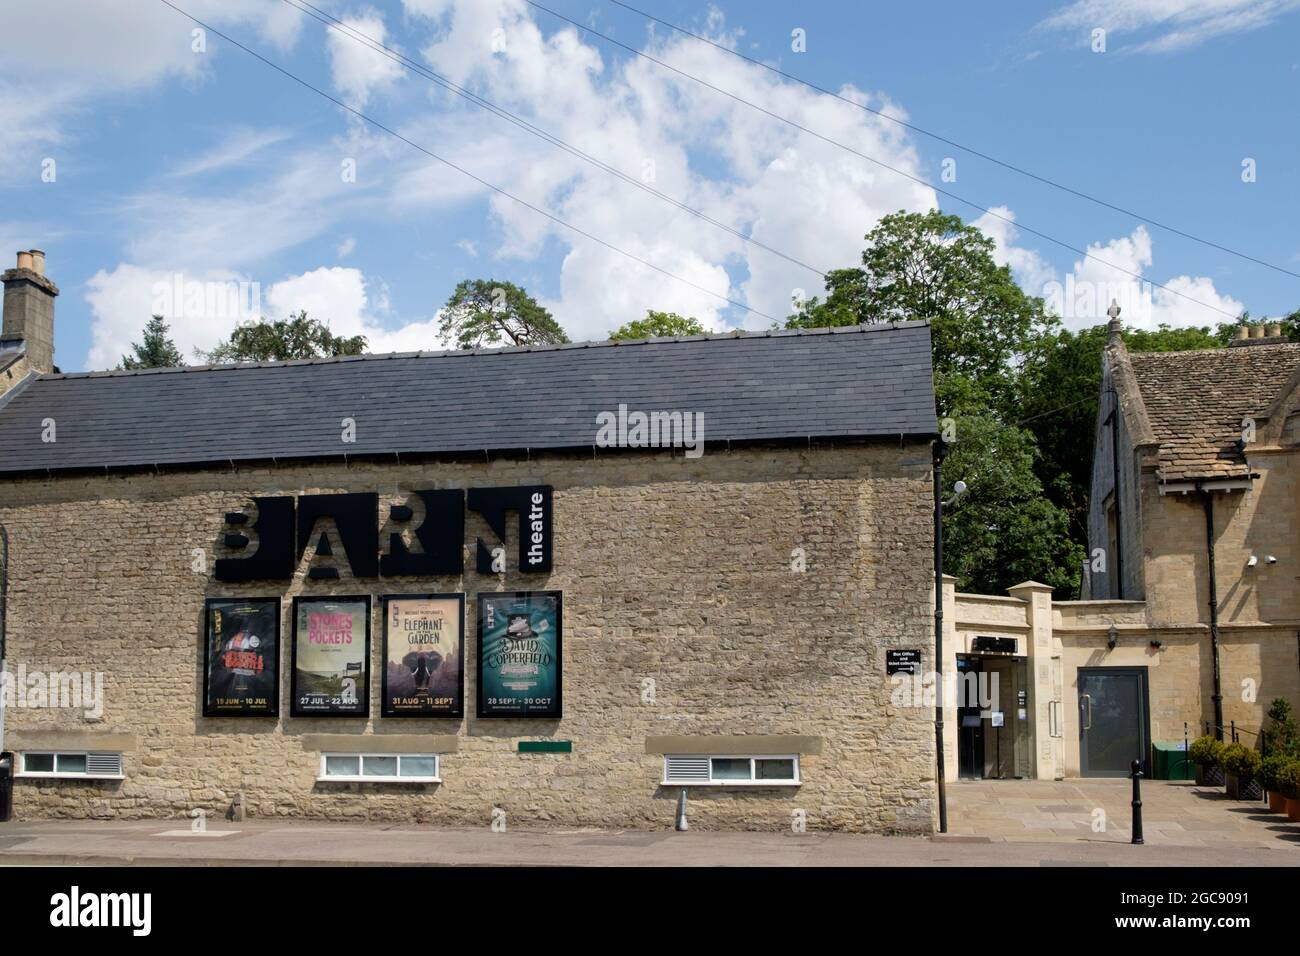 Around Cirencester, a traditional Gloucester market town in the Cotswolds. The Barn theatre Stock Photo